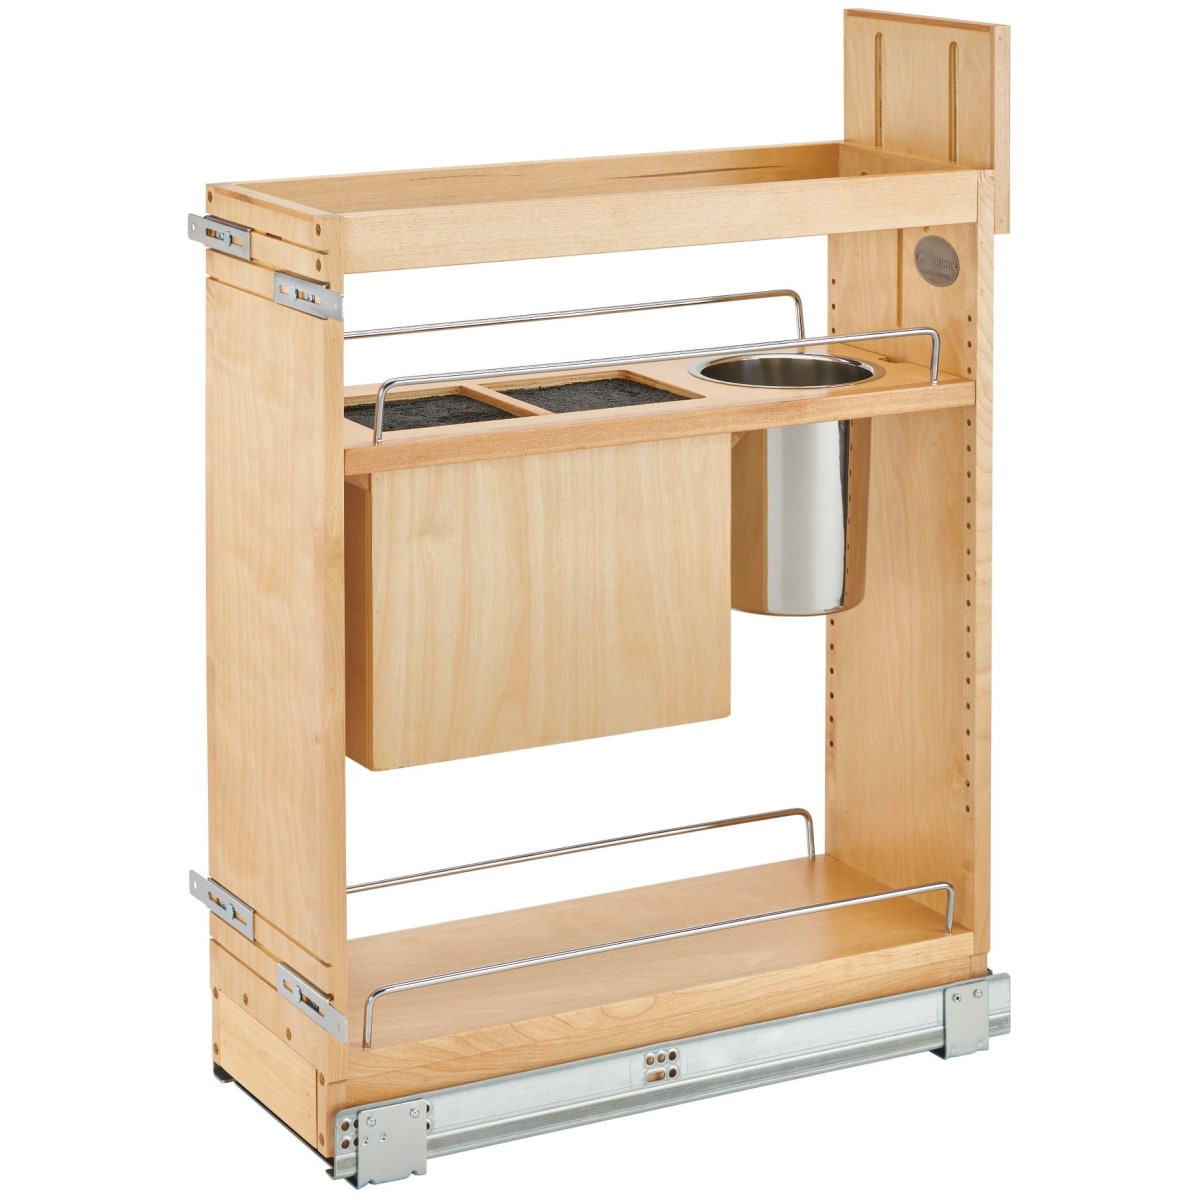 Rev-A-Shelf 448KB Series Pull-Out Knife and Utensil Base Cabinet